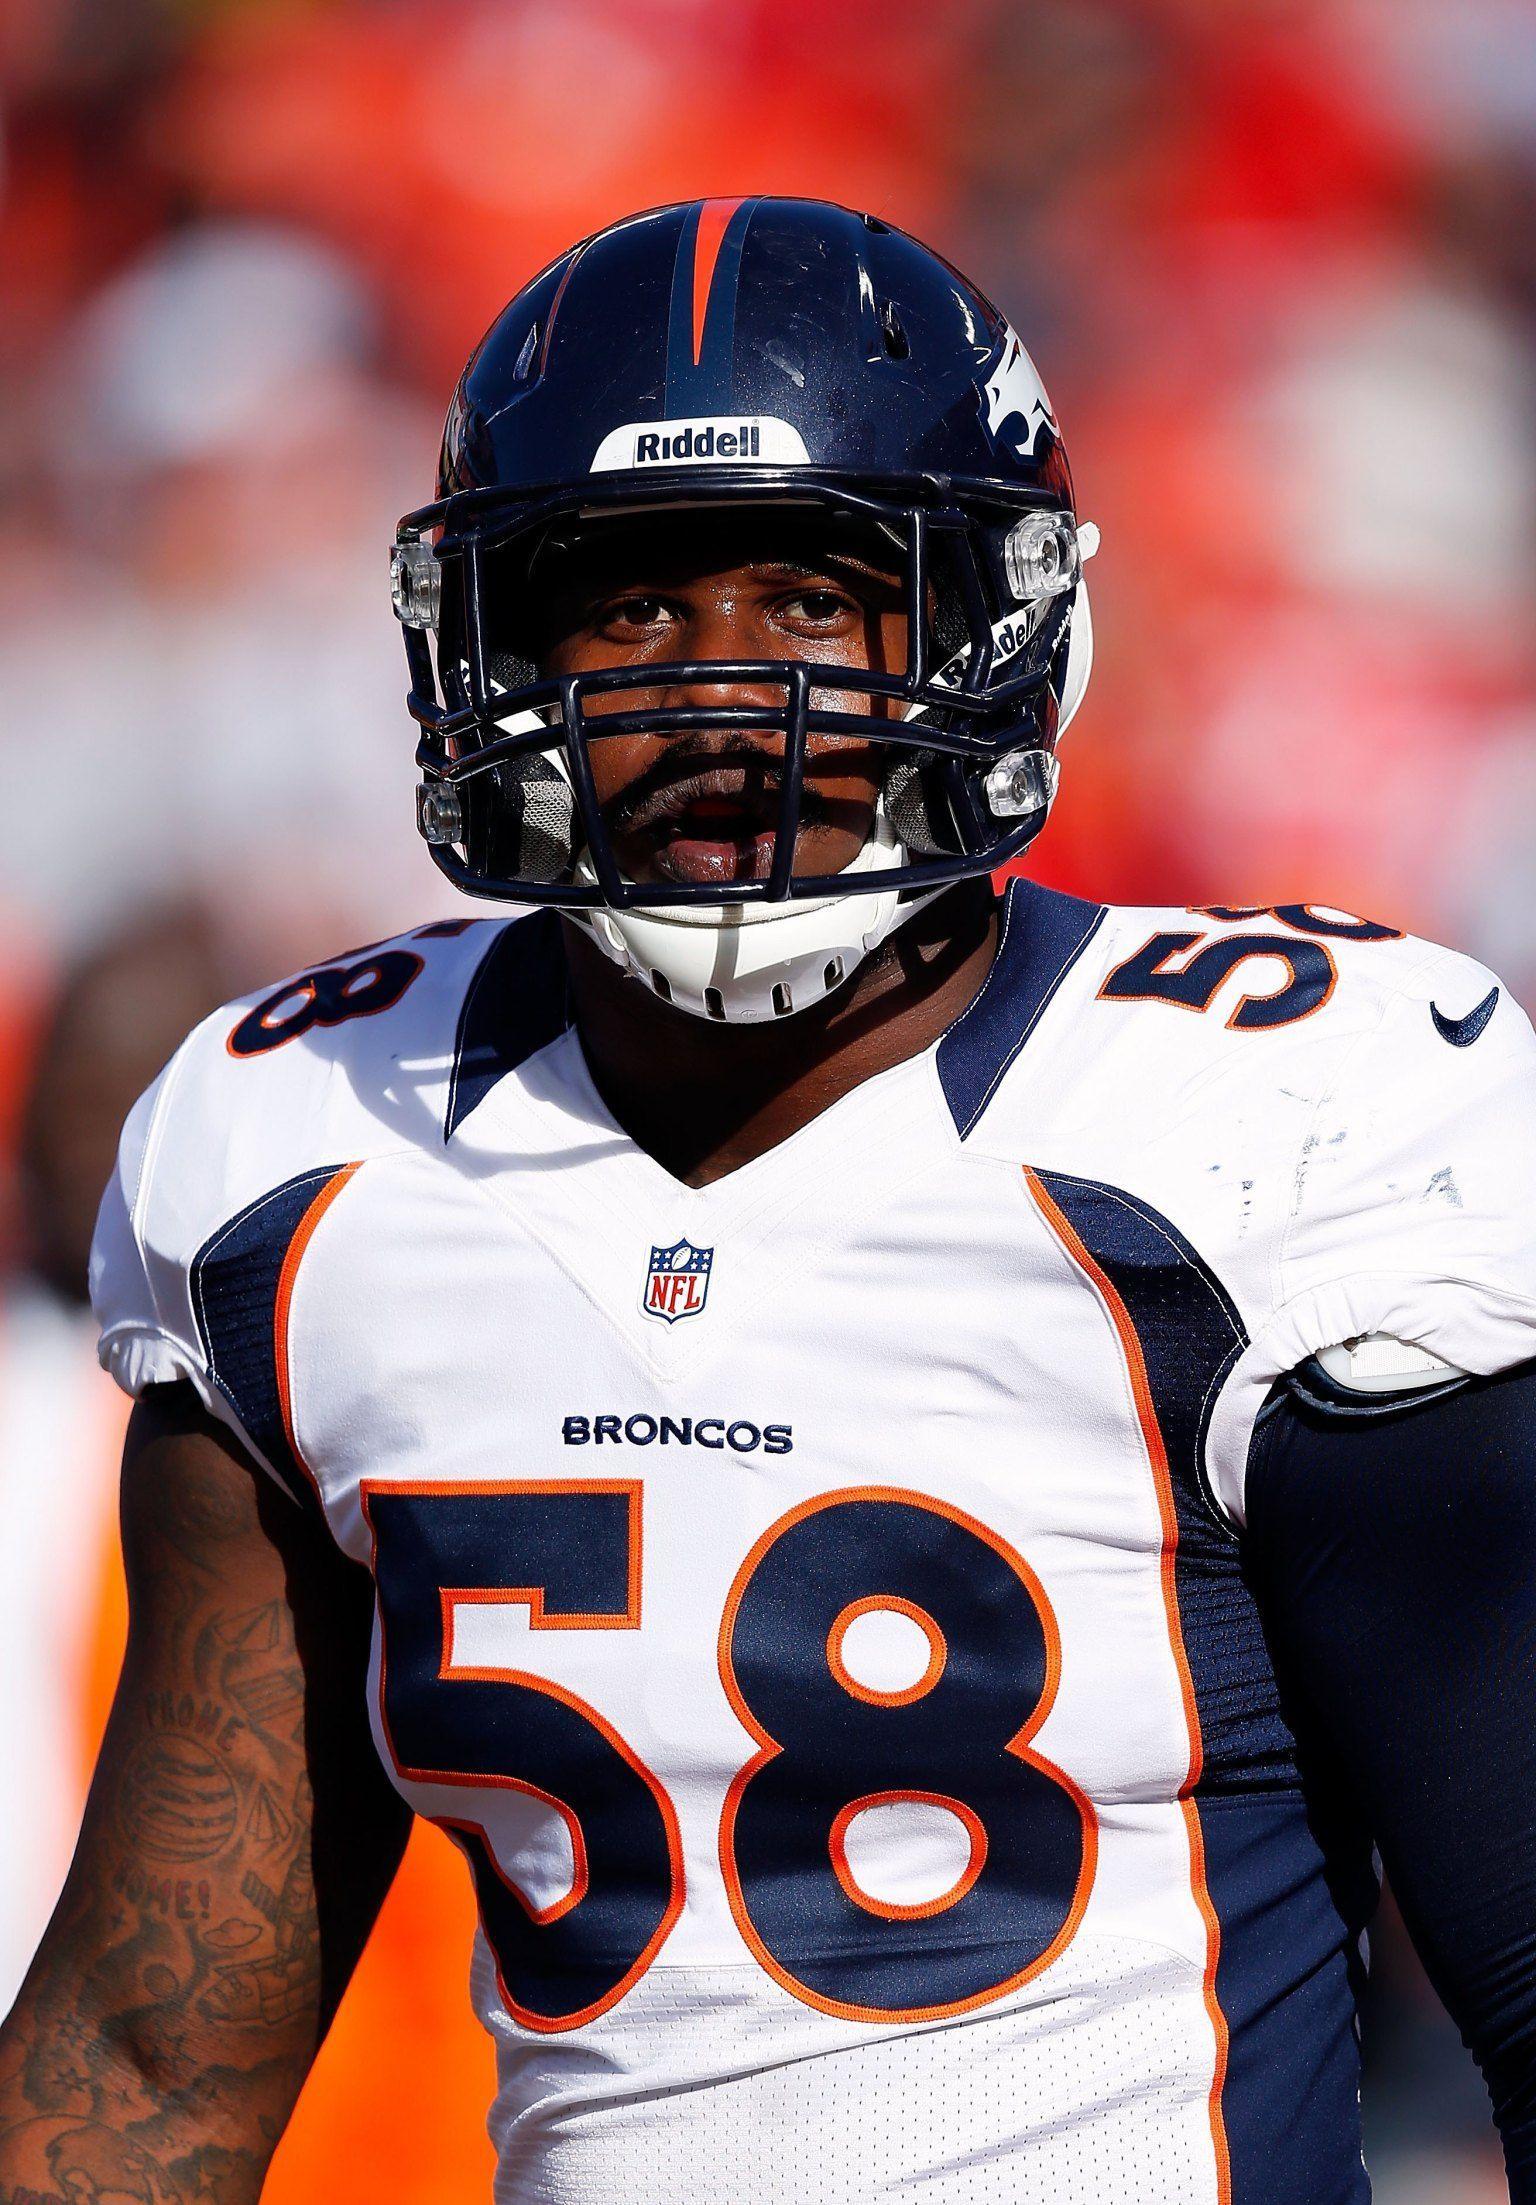 Von Miller Facing Suspension For Violating NFL Policy: REPORTS